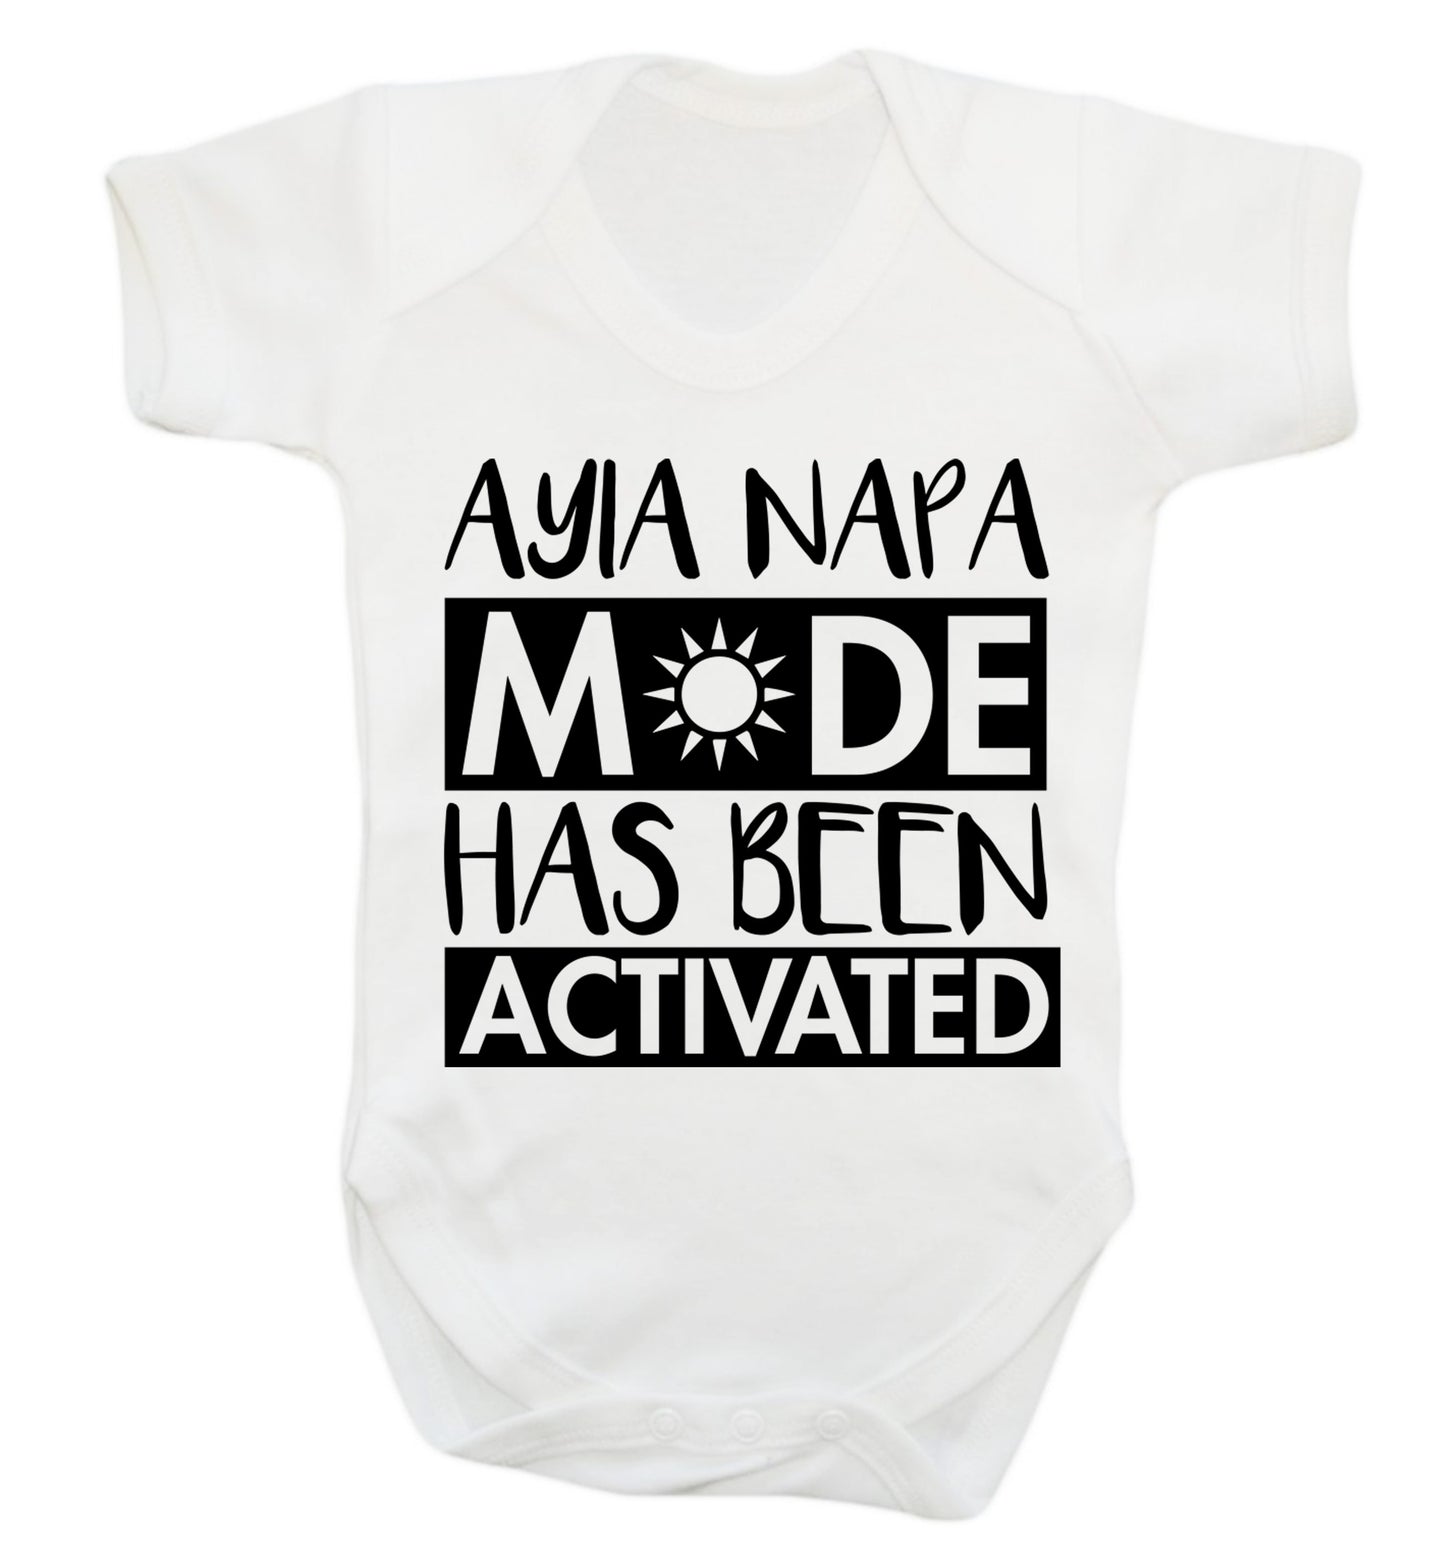 Aiya Napa mode has been activated Baby Vest white 18-24 months